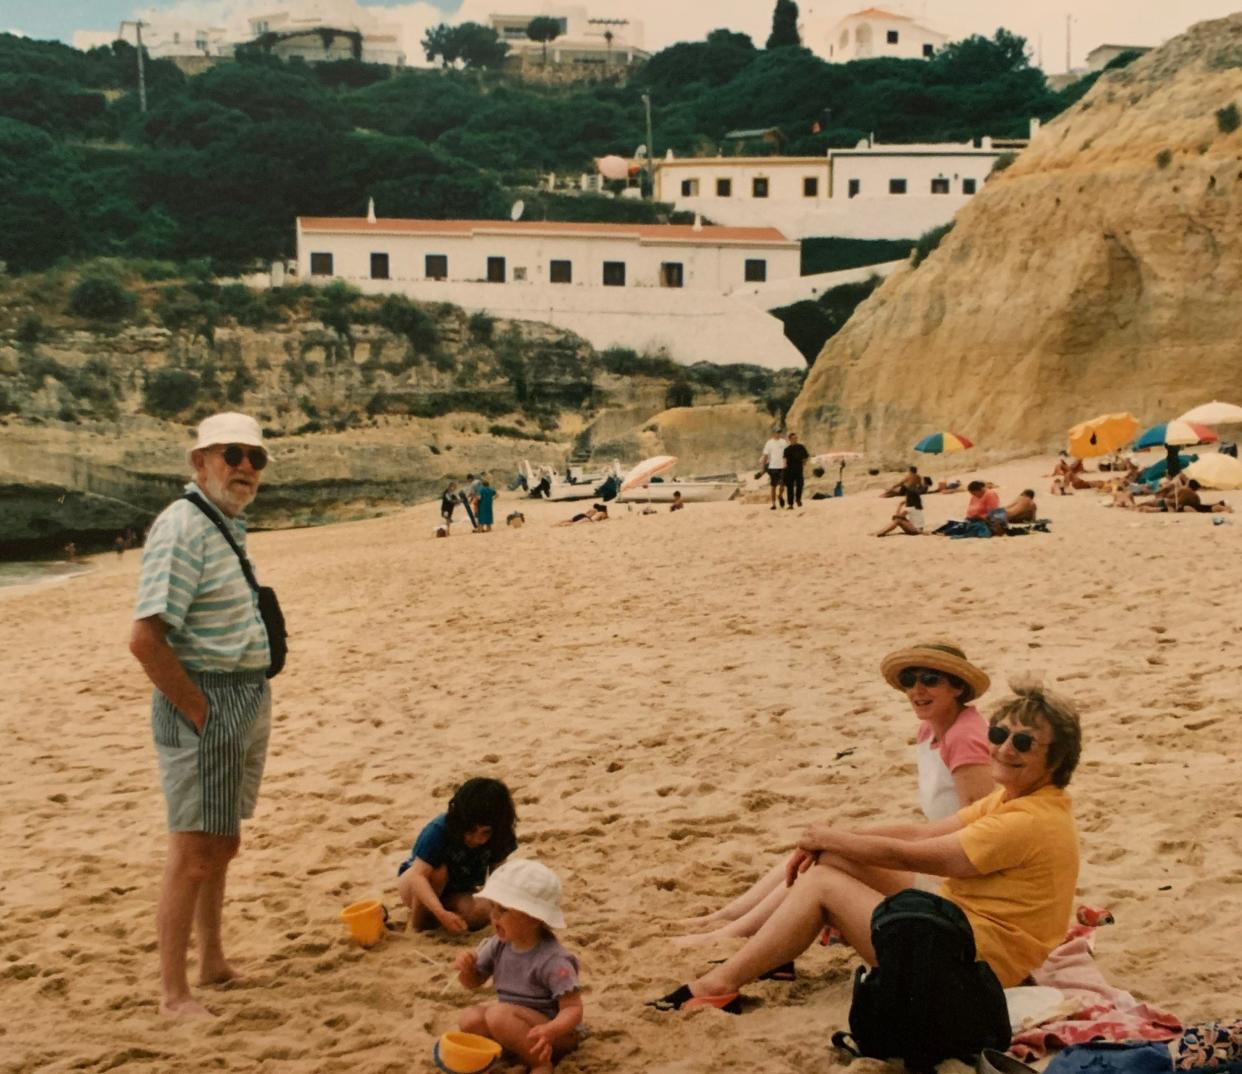 Three generations of writer Sophie Dickson's family on holiday in Portugal